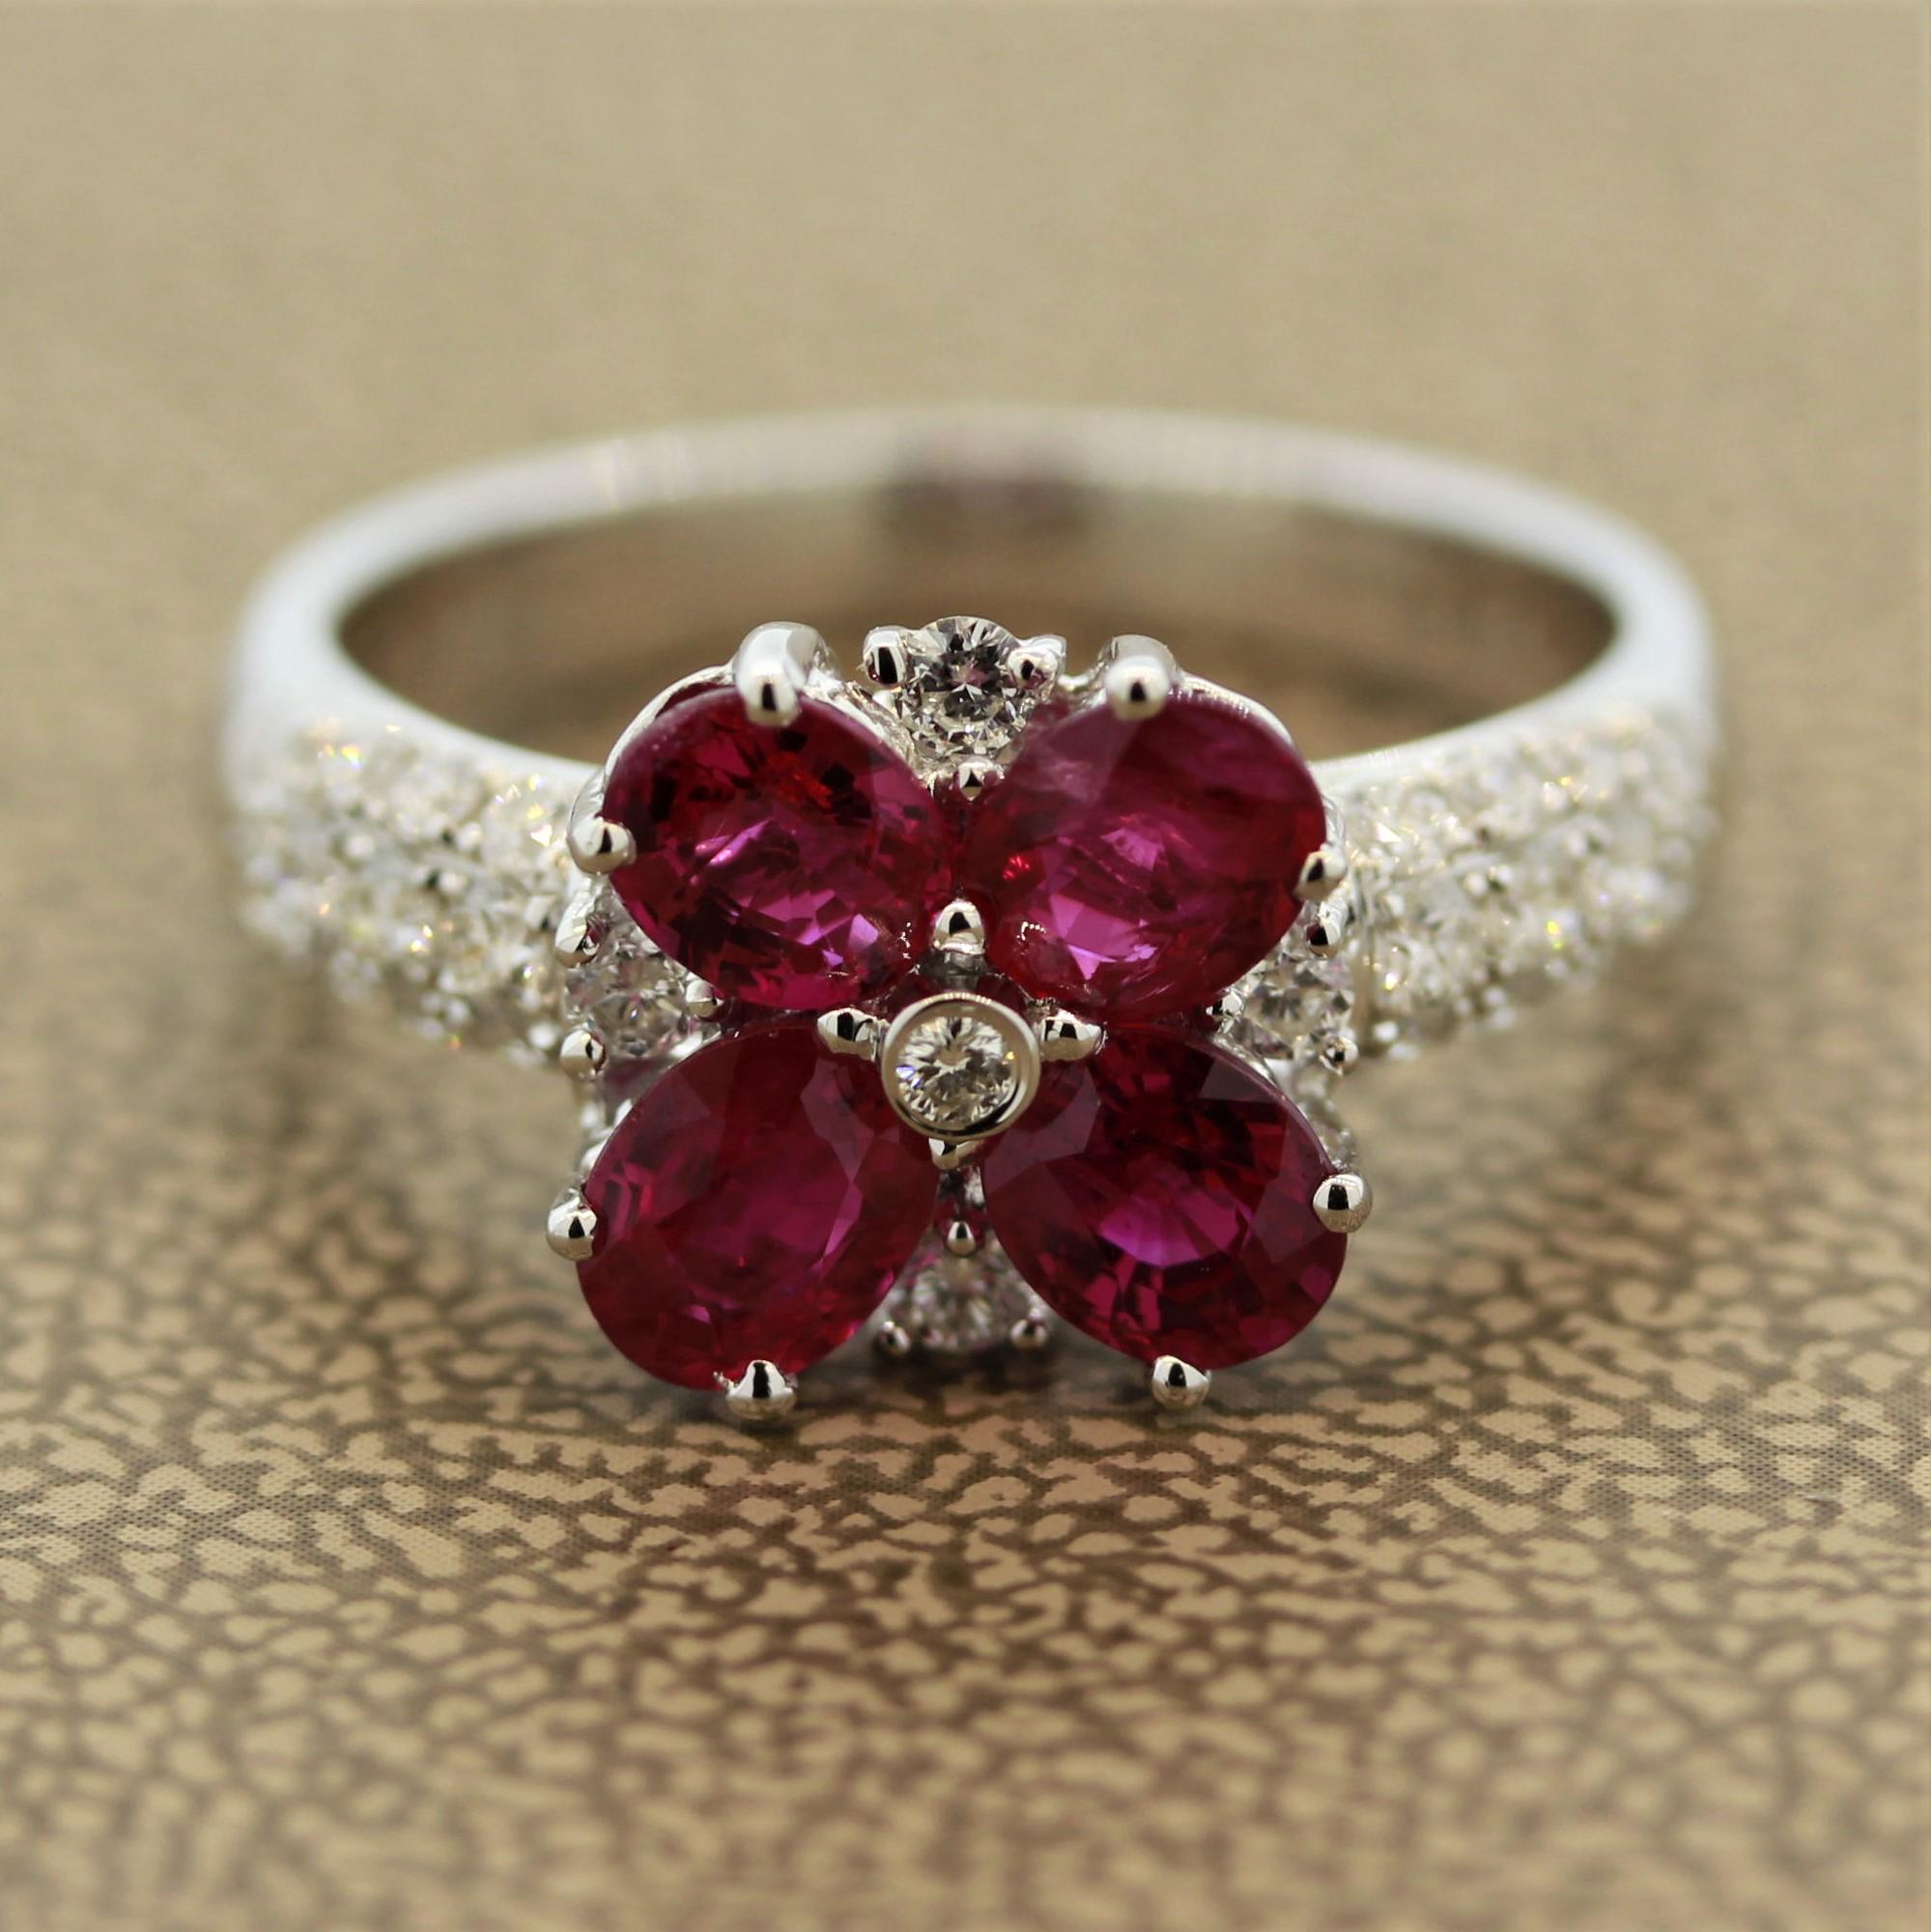 A sweet ring featuring 4 oval shaped rubies weighing a total of 1.77 carats. They have a bright clean red color and are set as the petals of a flower. They are complemented by 0.48 carats of round brilliant cut diamonds made in 18k white gold.

Ring